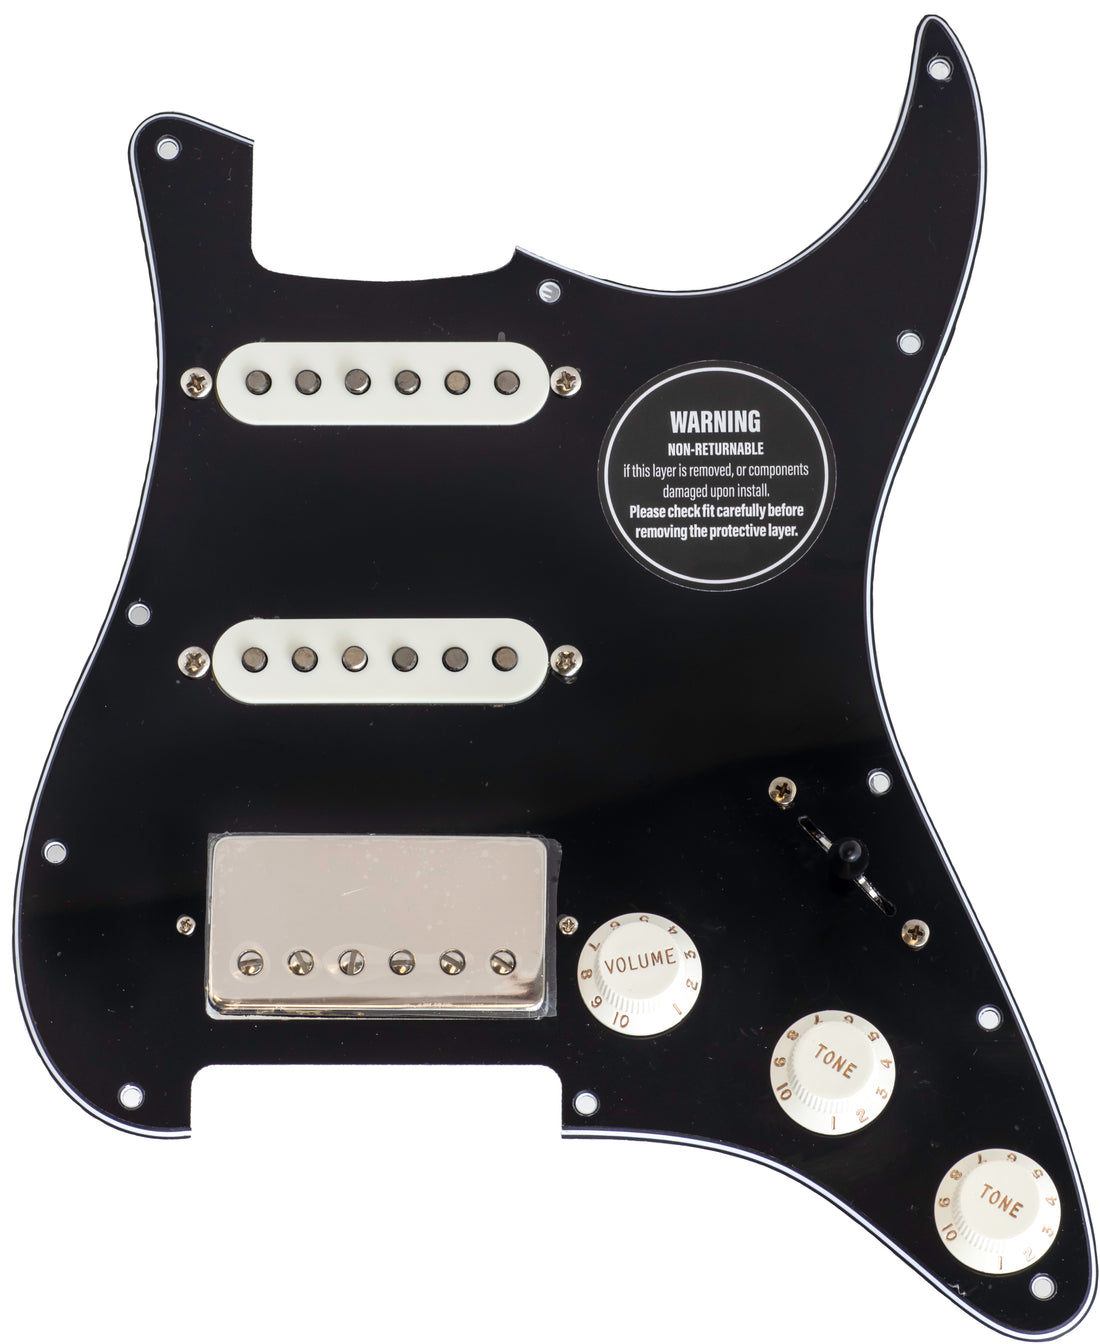 ObsidianWire Black HSS loaded pickguard for Strat with Parchment covers